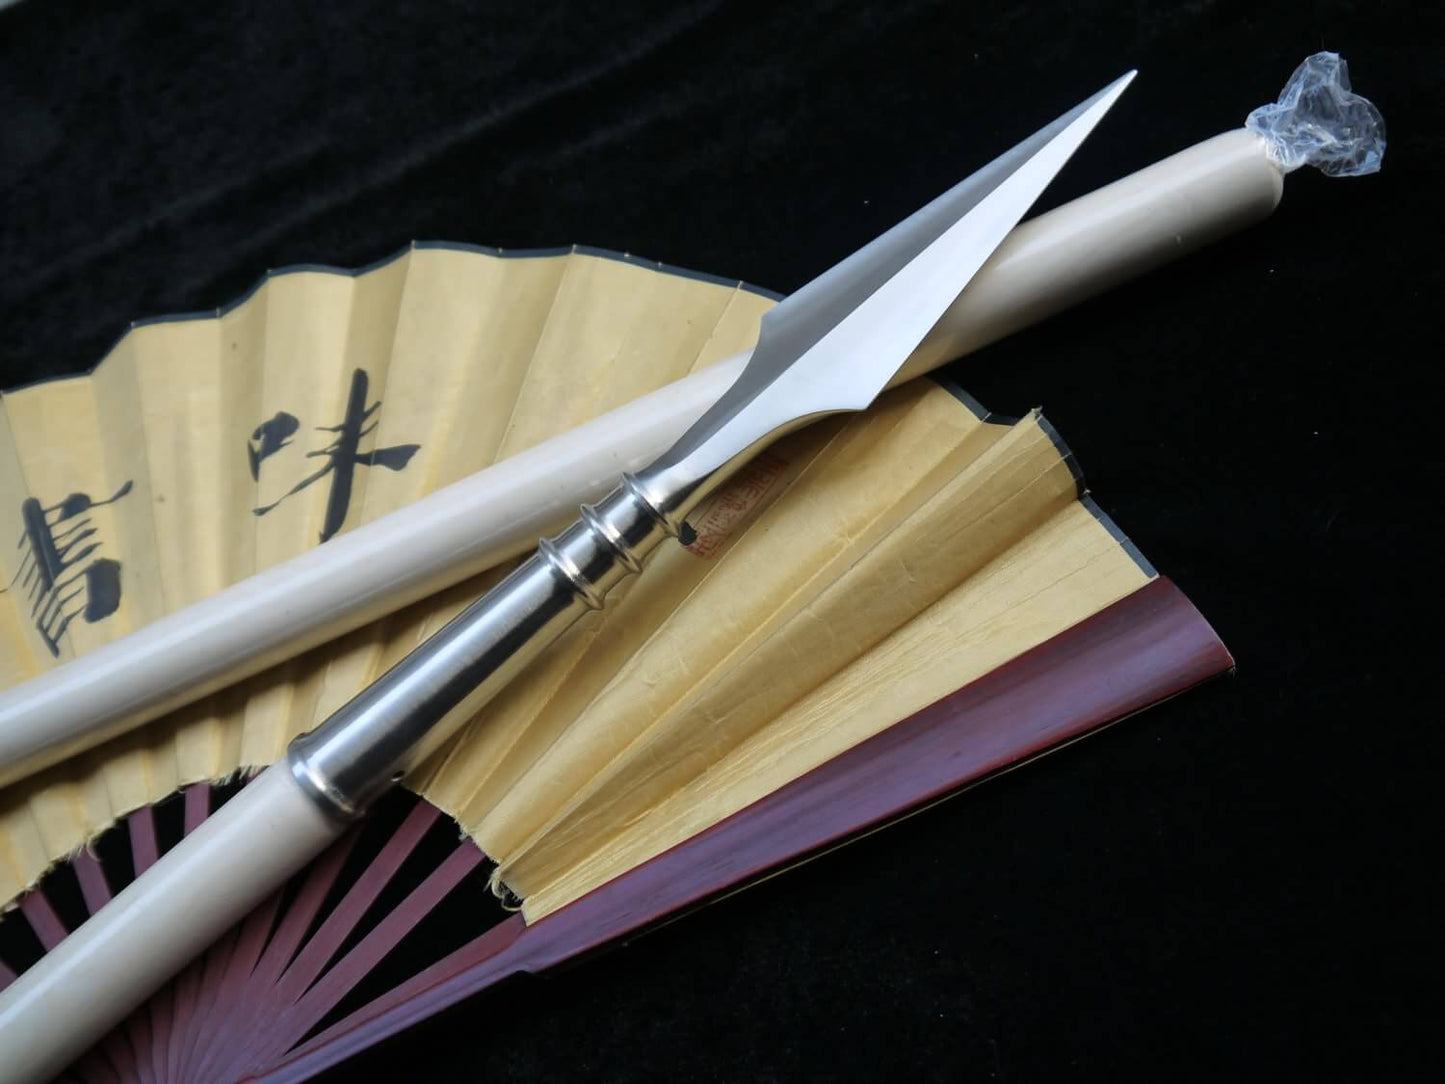 Wu shu Spear/Spears/Stainless steel/Wax rod/Chinese martial arts equipment - Chinese sword shop